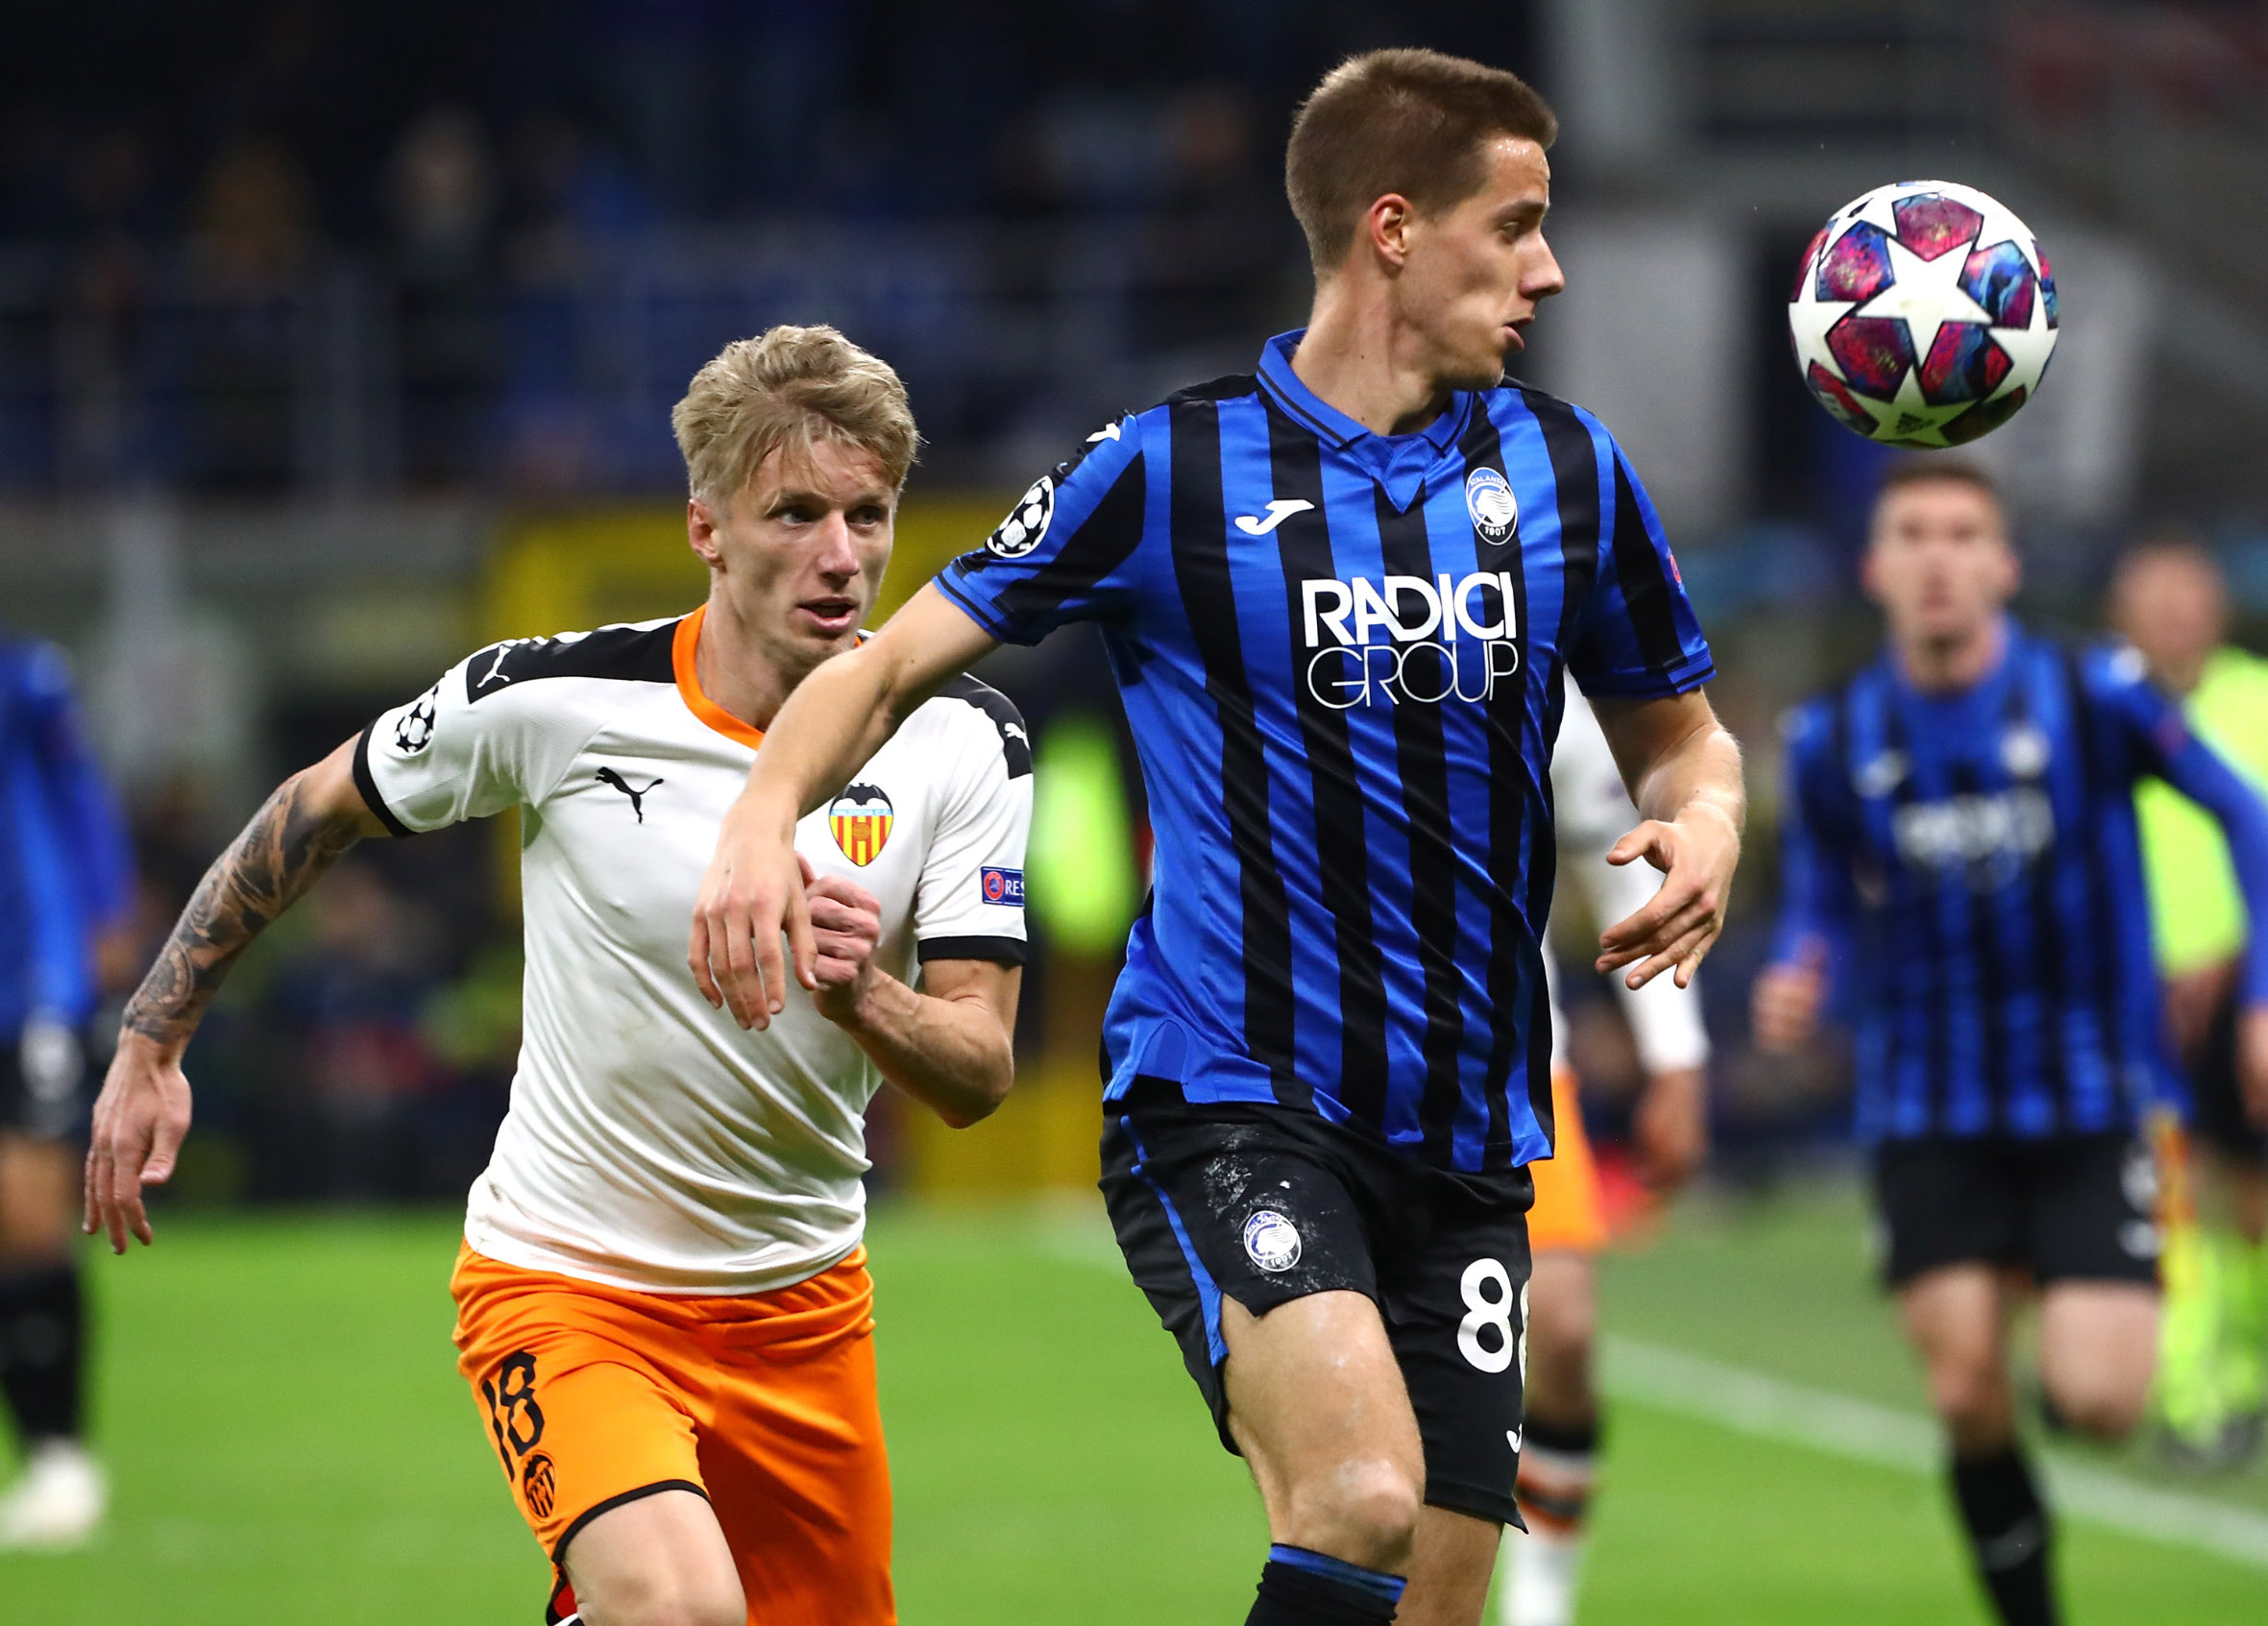 MILAN, ITALY - FEBRUARY 19: Mario Pasalic (R) of Atalanta competes for the ball with Daniel Wass (L) of Valencia CF during the UEFA Champions League round of 16 first leg match between Atalanta and Valencia CF at San Siro Stadium on February 19, 2020 in Milan, Italy. (Photo by Marco Luzzani/Getty Images)